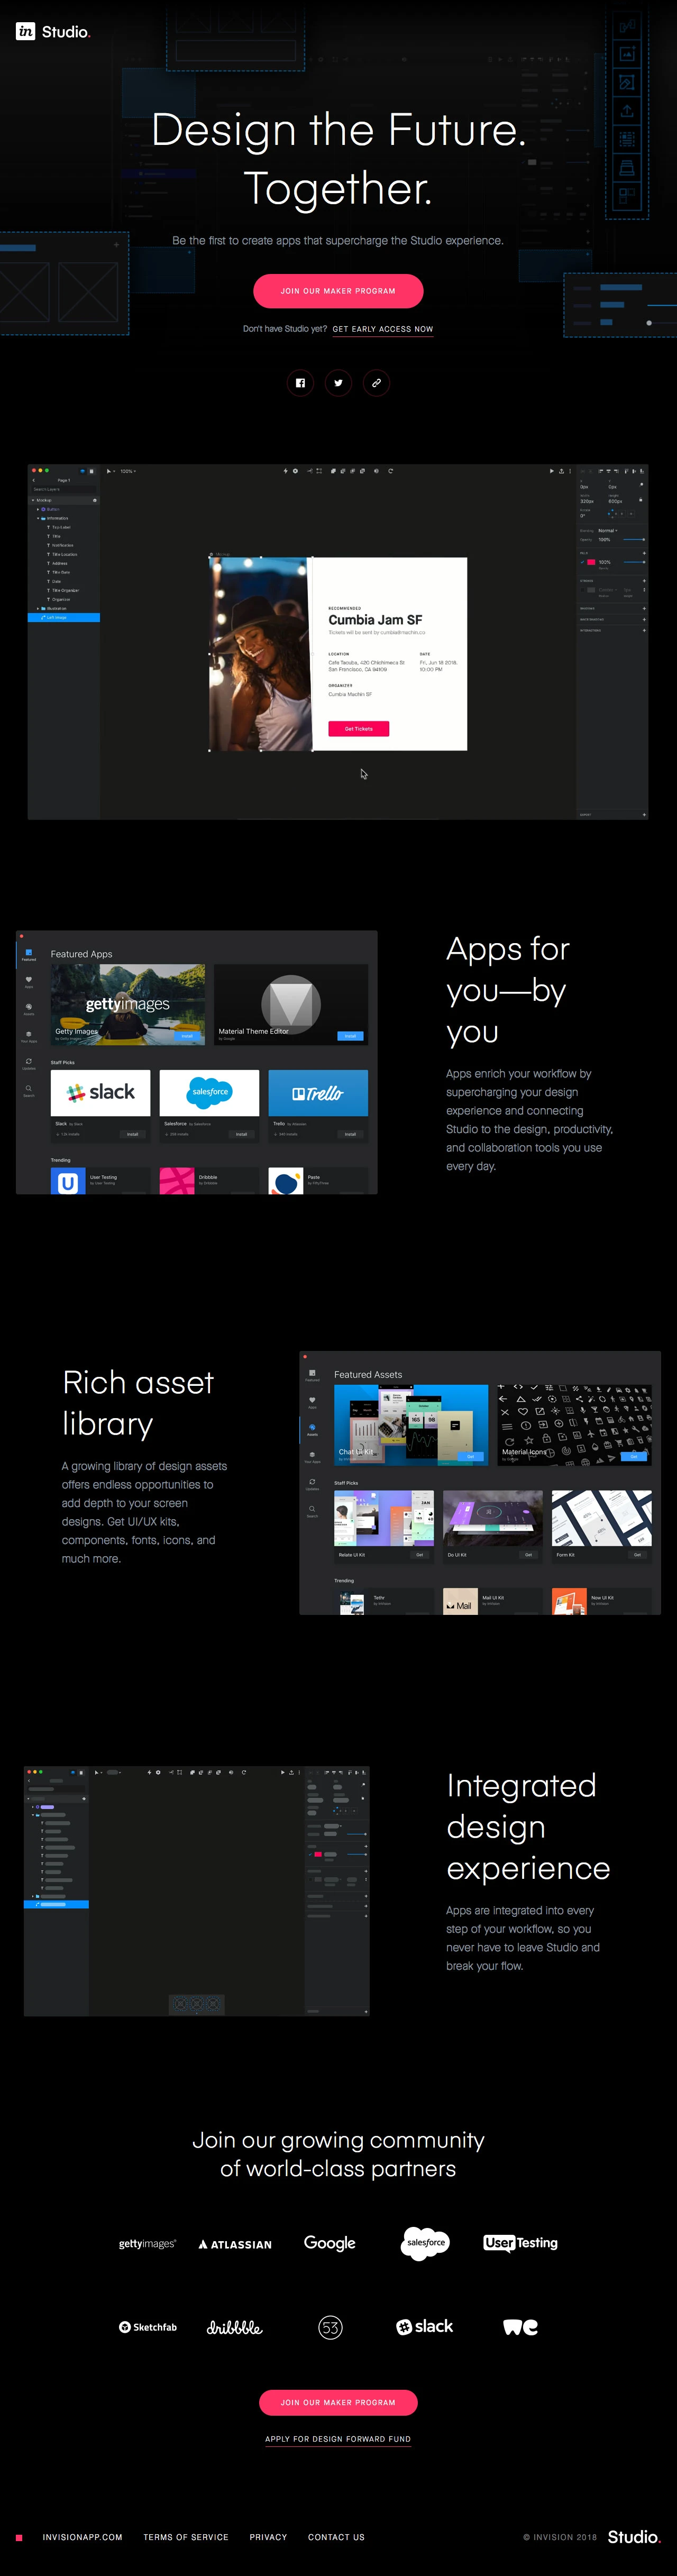 InVision Studio Platform Landing Page Example: Get a first look at the InVision Studio Platform—App Store, Asset Library, and Open API.